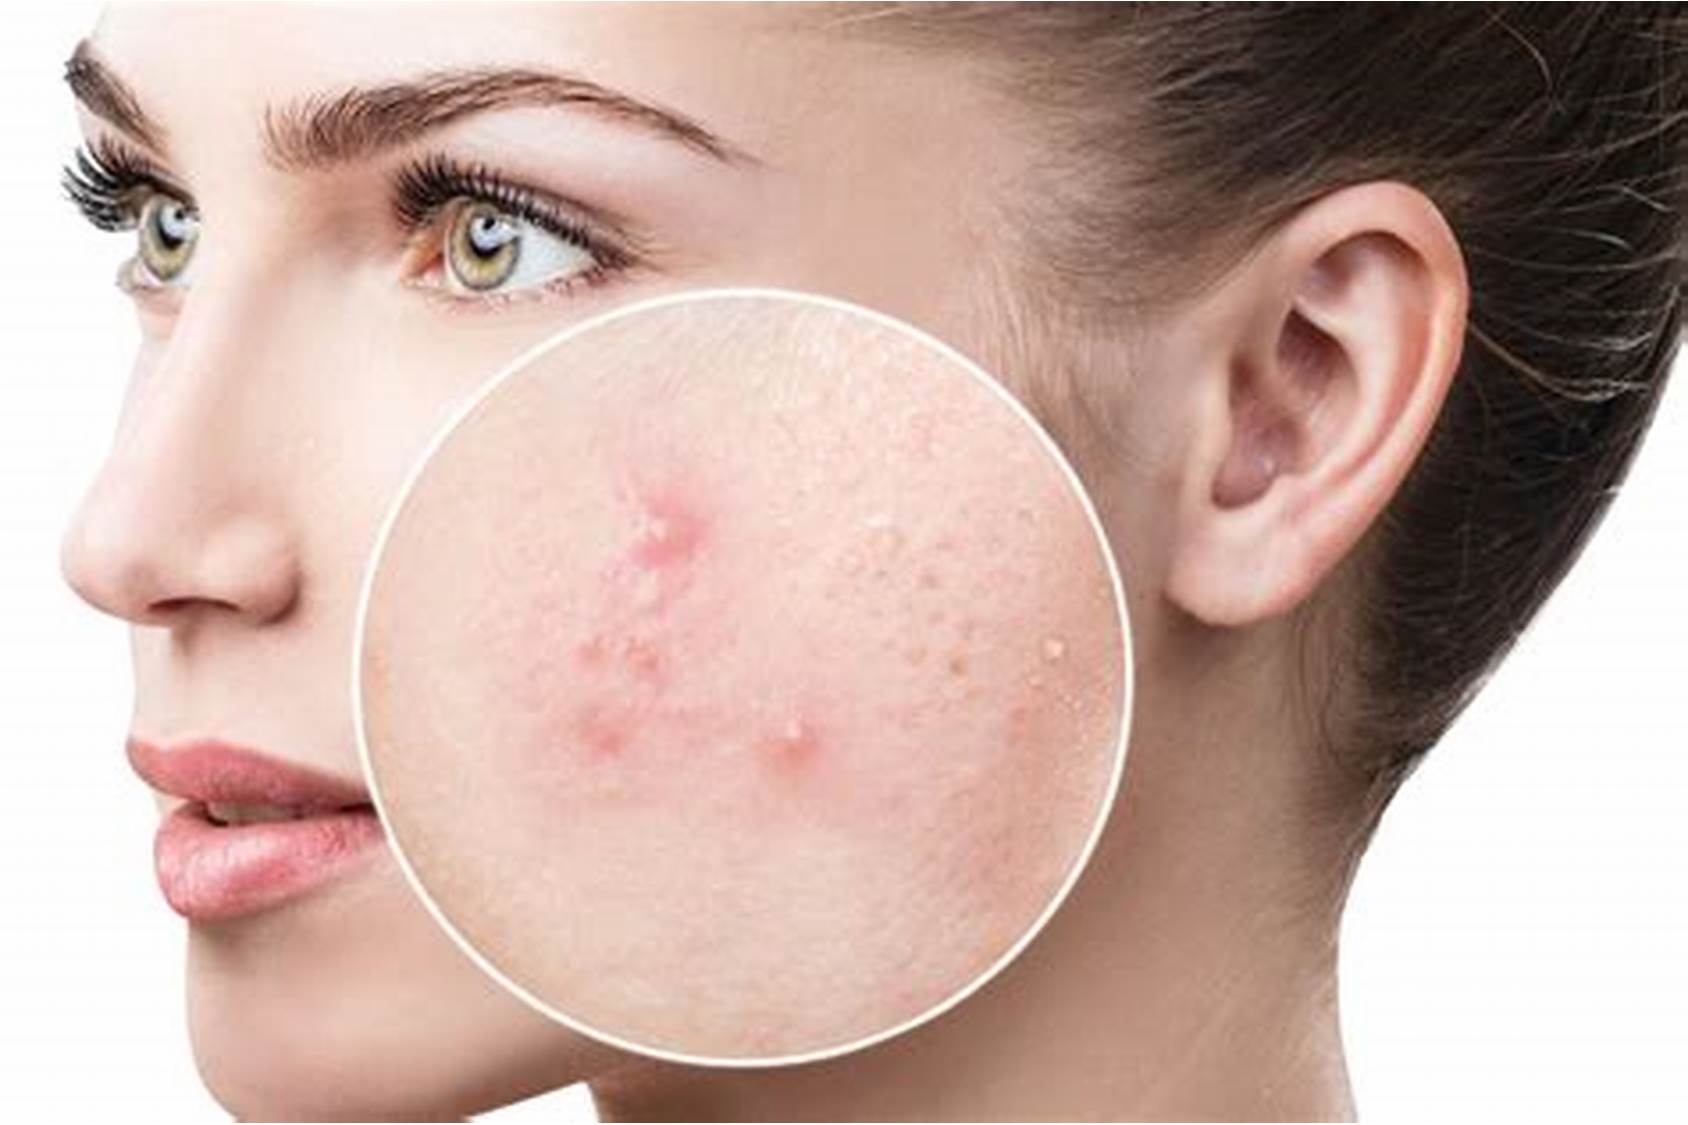 Is popping your pimples bad?